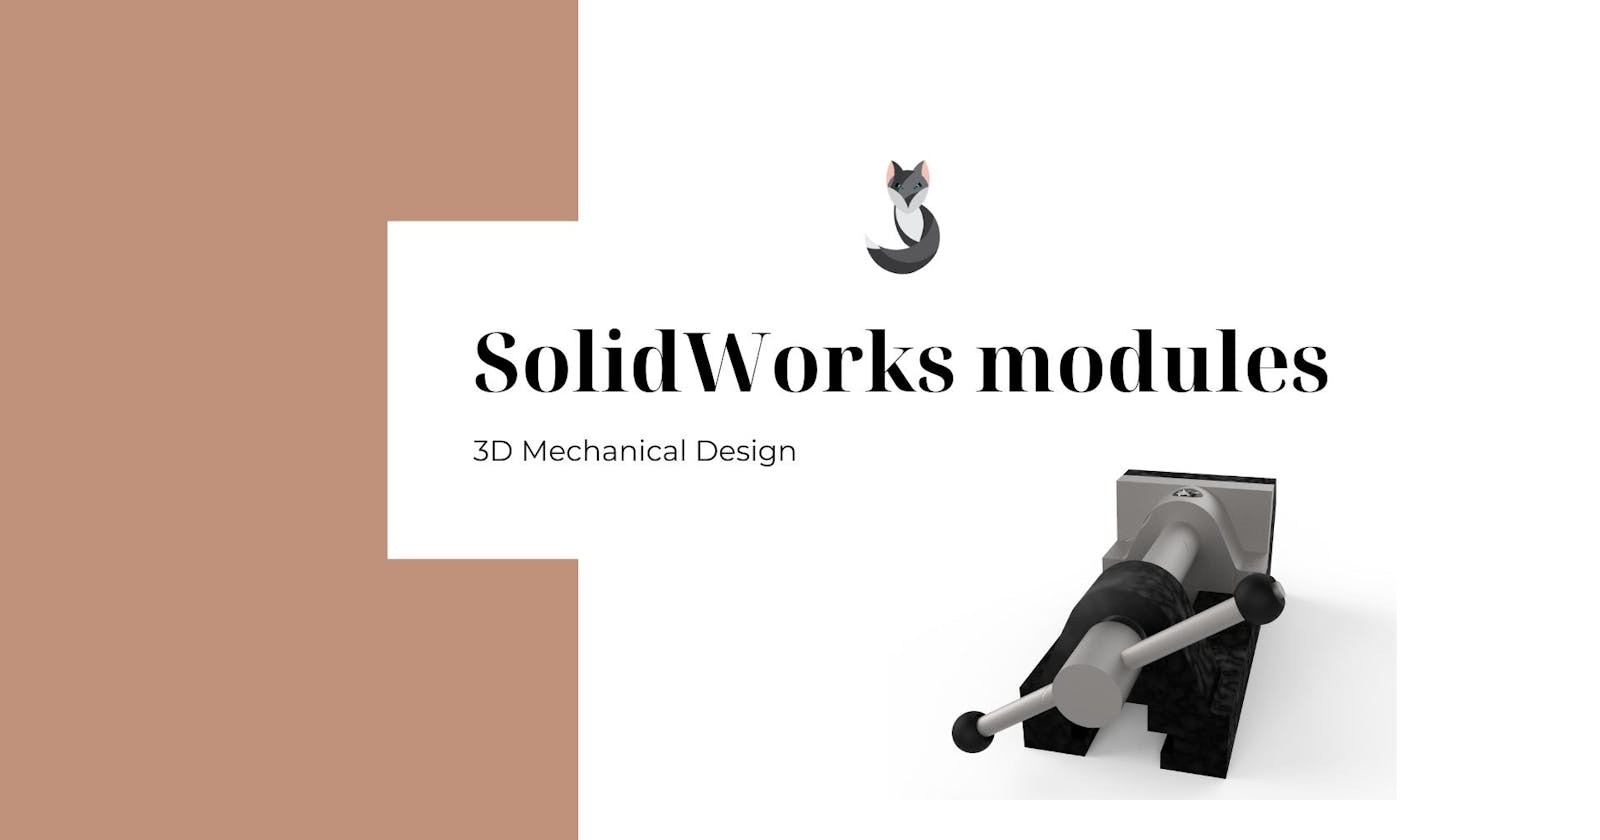 SolidWorks: A Powerful Platform for Creating Precision 3D Models